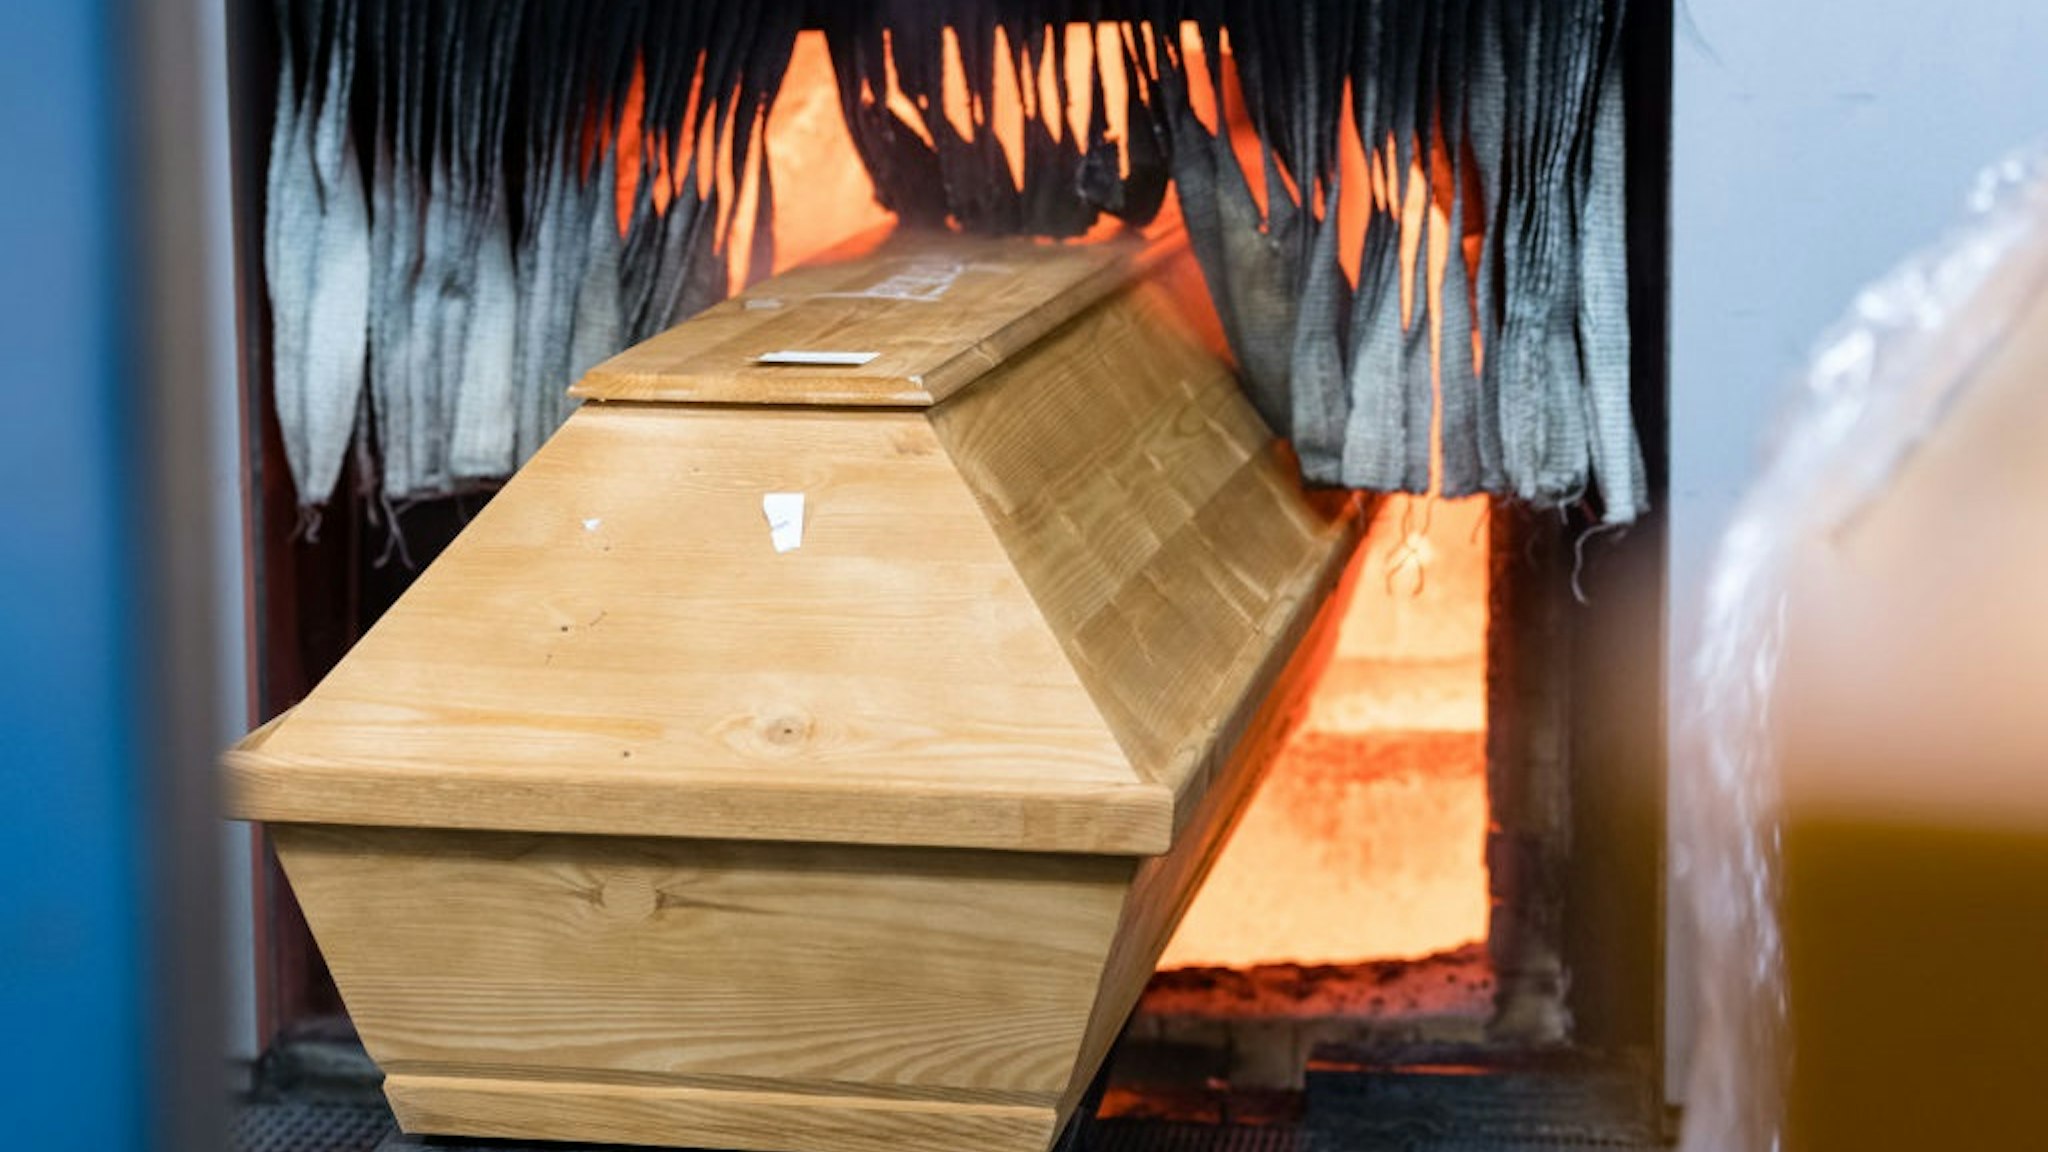 A coffin is moved for cremation into the furnace at the crematorium in Meissen, eastern Germany on January 13, 2021, during the ongoing novel coronavirus (Covid-19) pandemic.